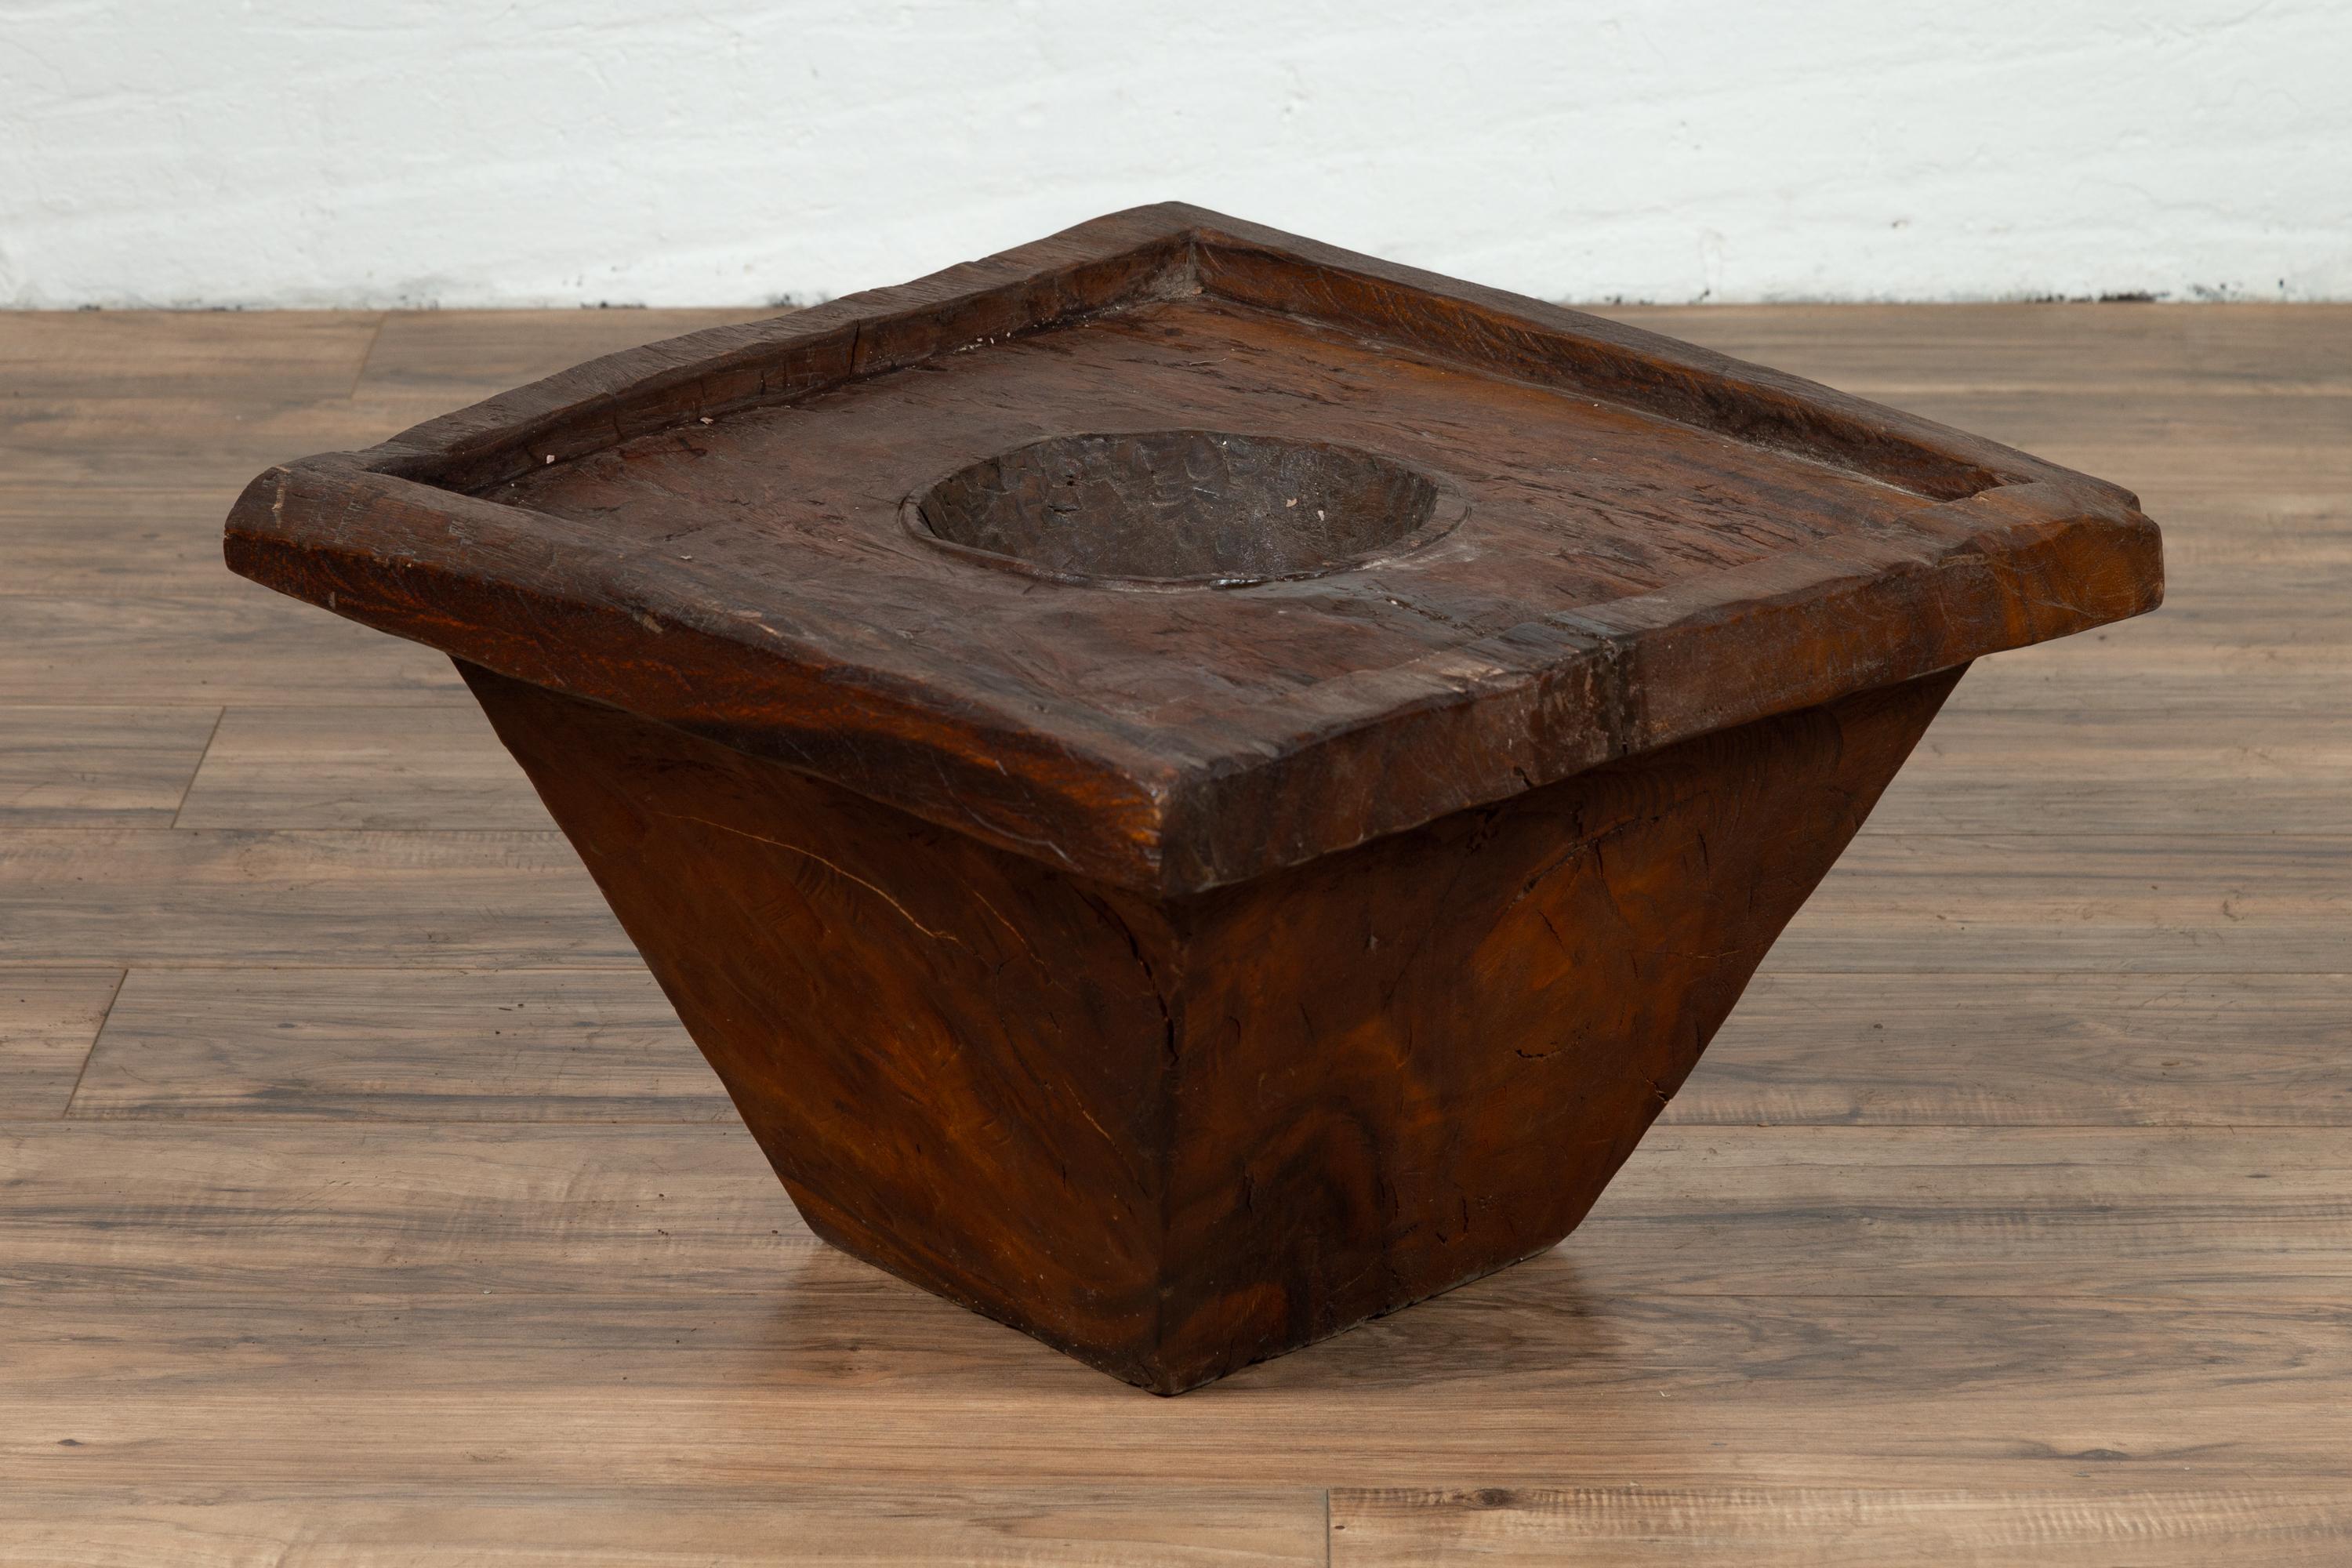 An antique wood Indonesian planter of rustic appearance from the early 20th century. Born in Indonesia and probably created to be a mortar used to store or grind up food, this wooden planter charms our eyes with its simple appearance and nicely